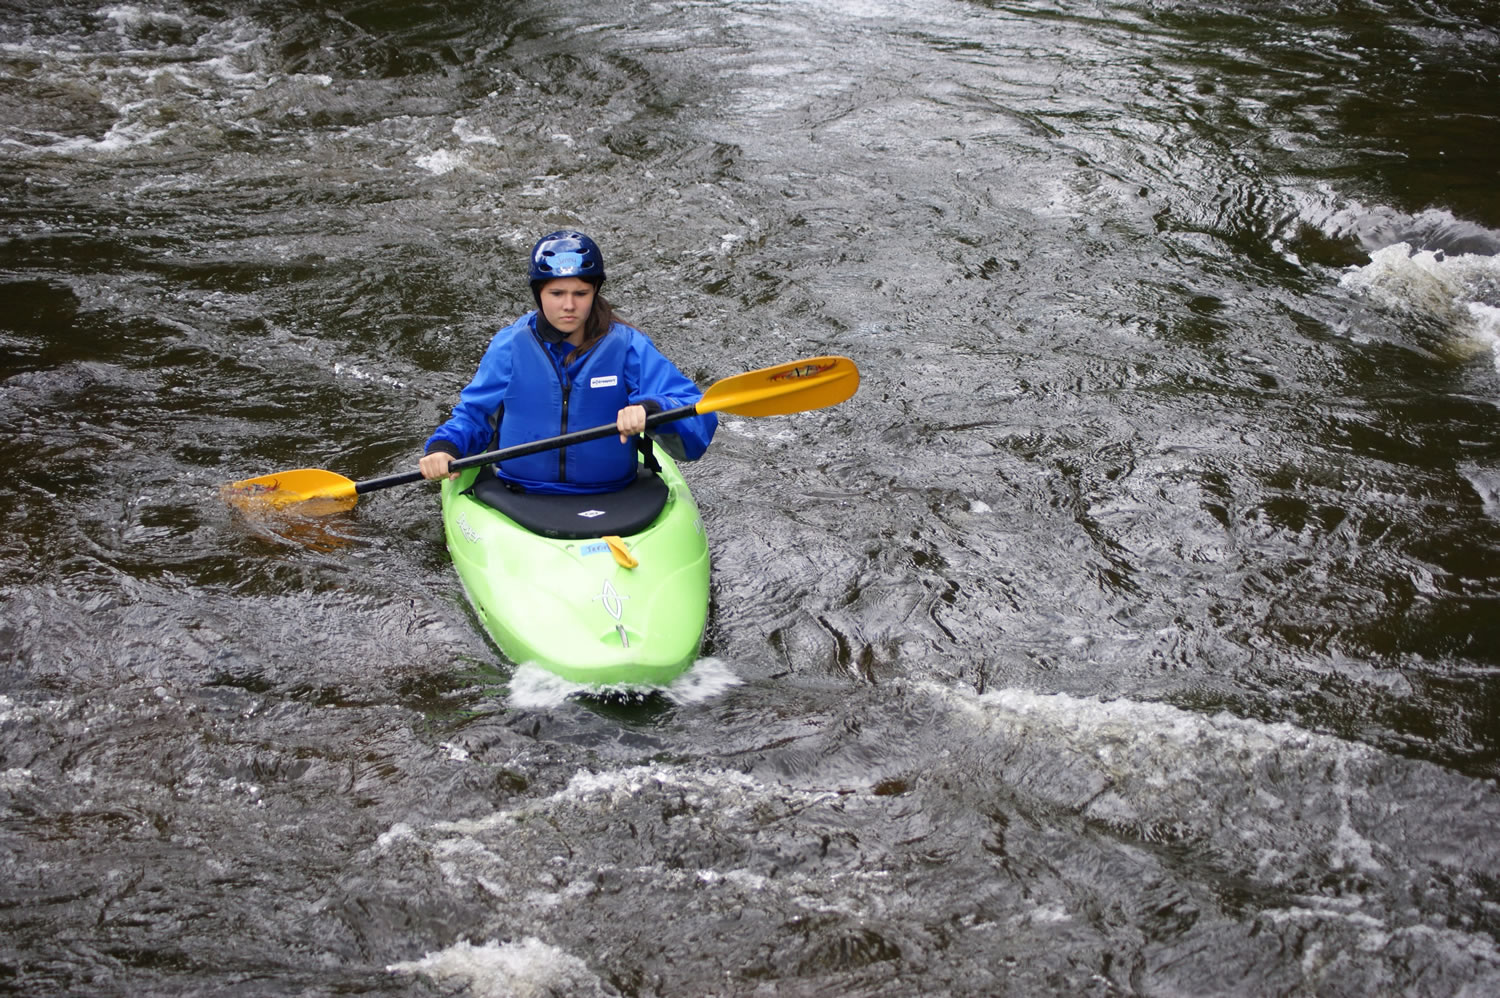 Boy Scouts Venturing crew member Jenny Welles kayaks on the Wolf River near White Lake, Wis.